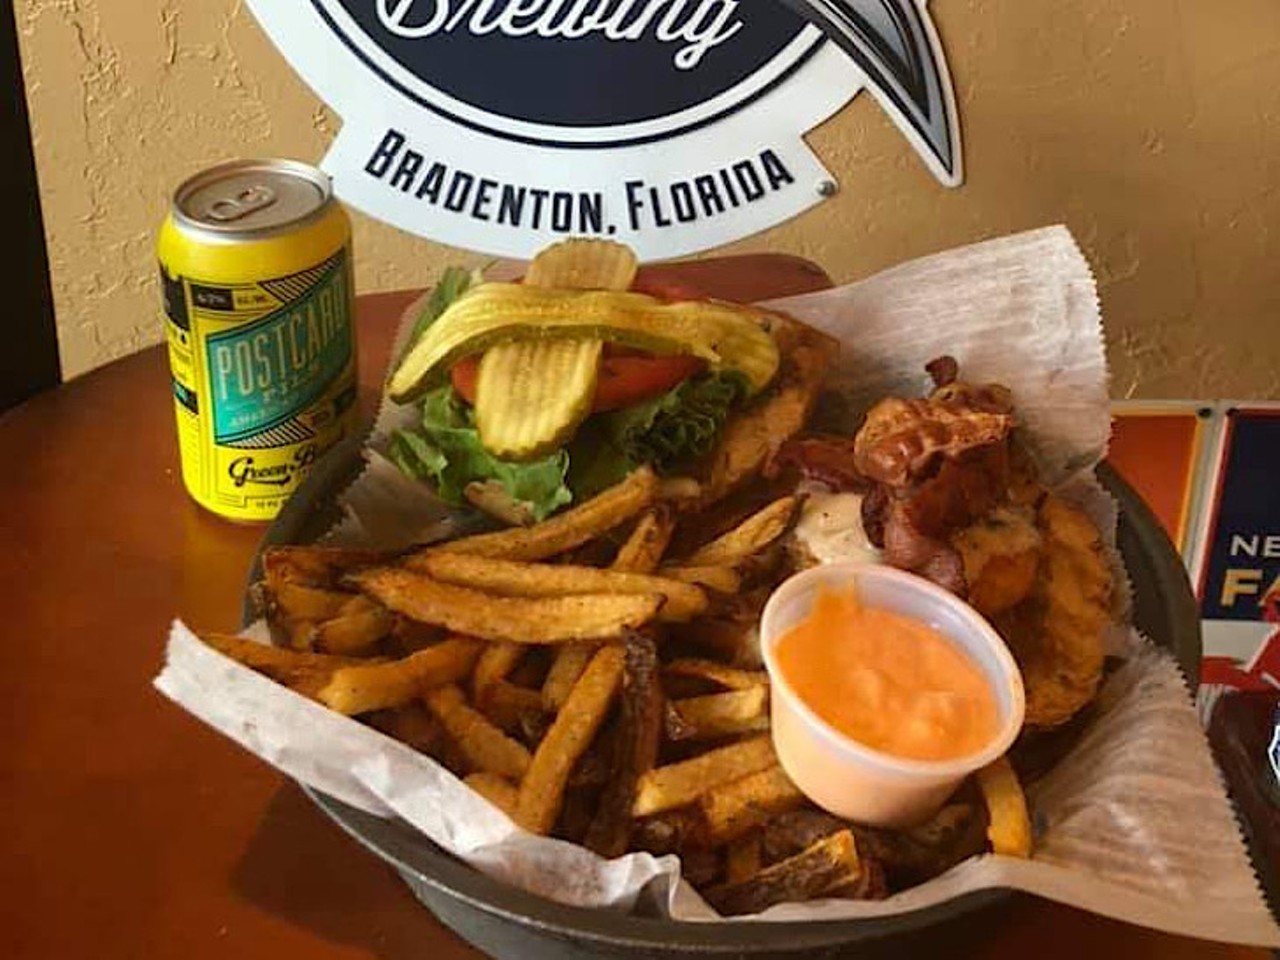 Burg Bar
1752 Central Ave, St. Petersburg, FL
The Burg Bar offers a buffalo chicken sandwich that has a beer-battered chicken breast tossed in buffalo sauce. Ranch dressing is then drizzled on, with lettuce and tomato. 
Photo via Burg Bar/Facebook